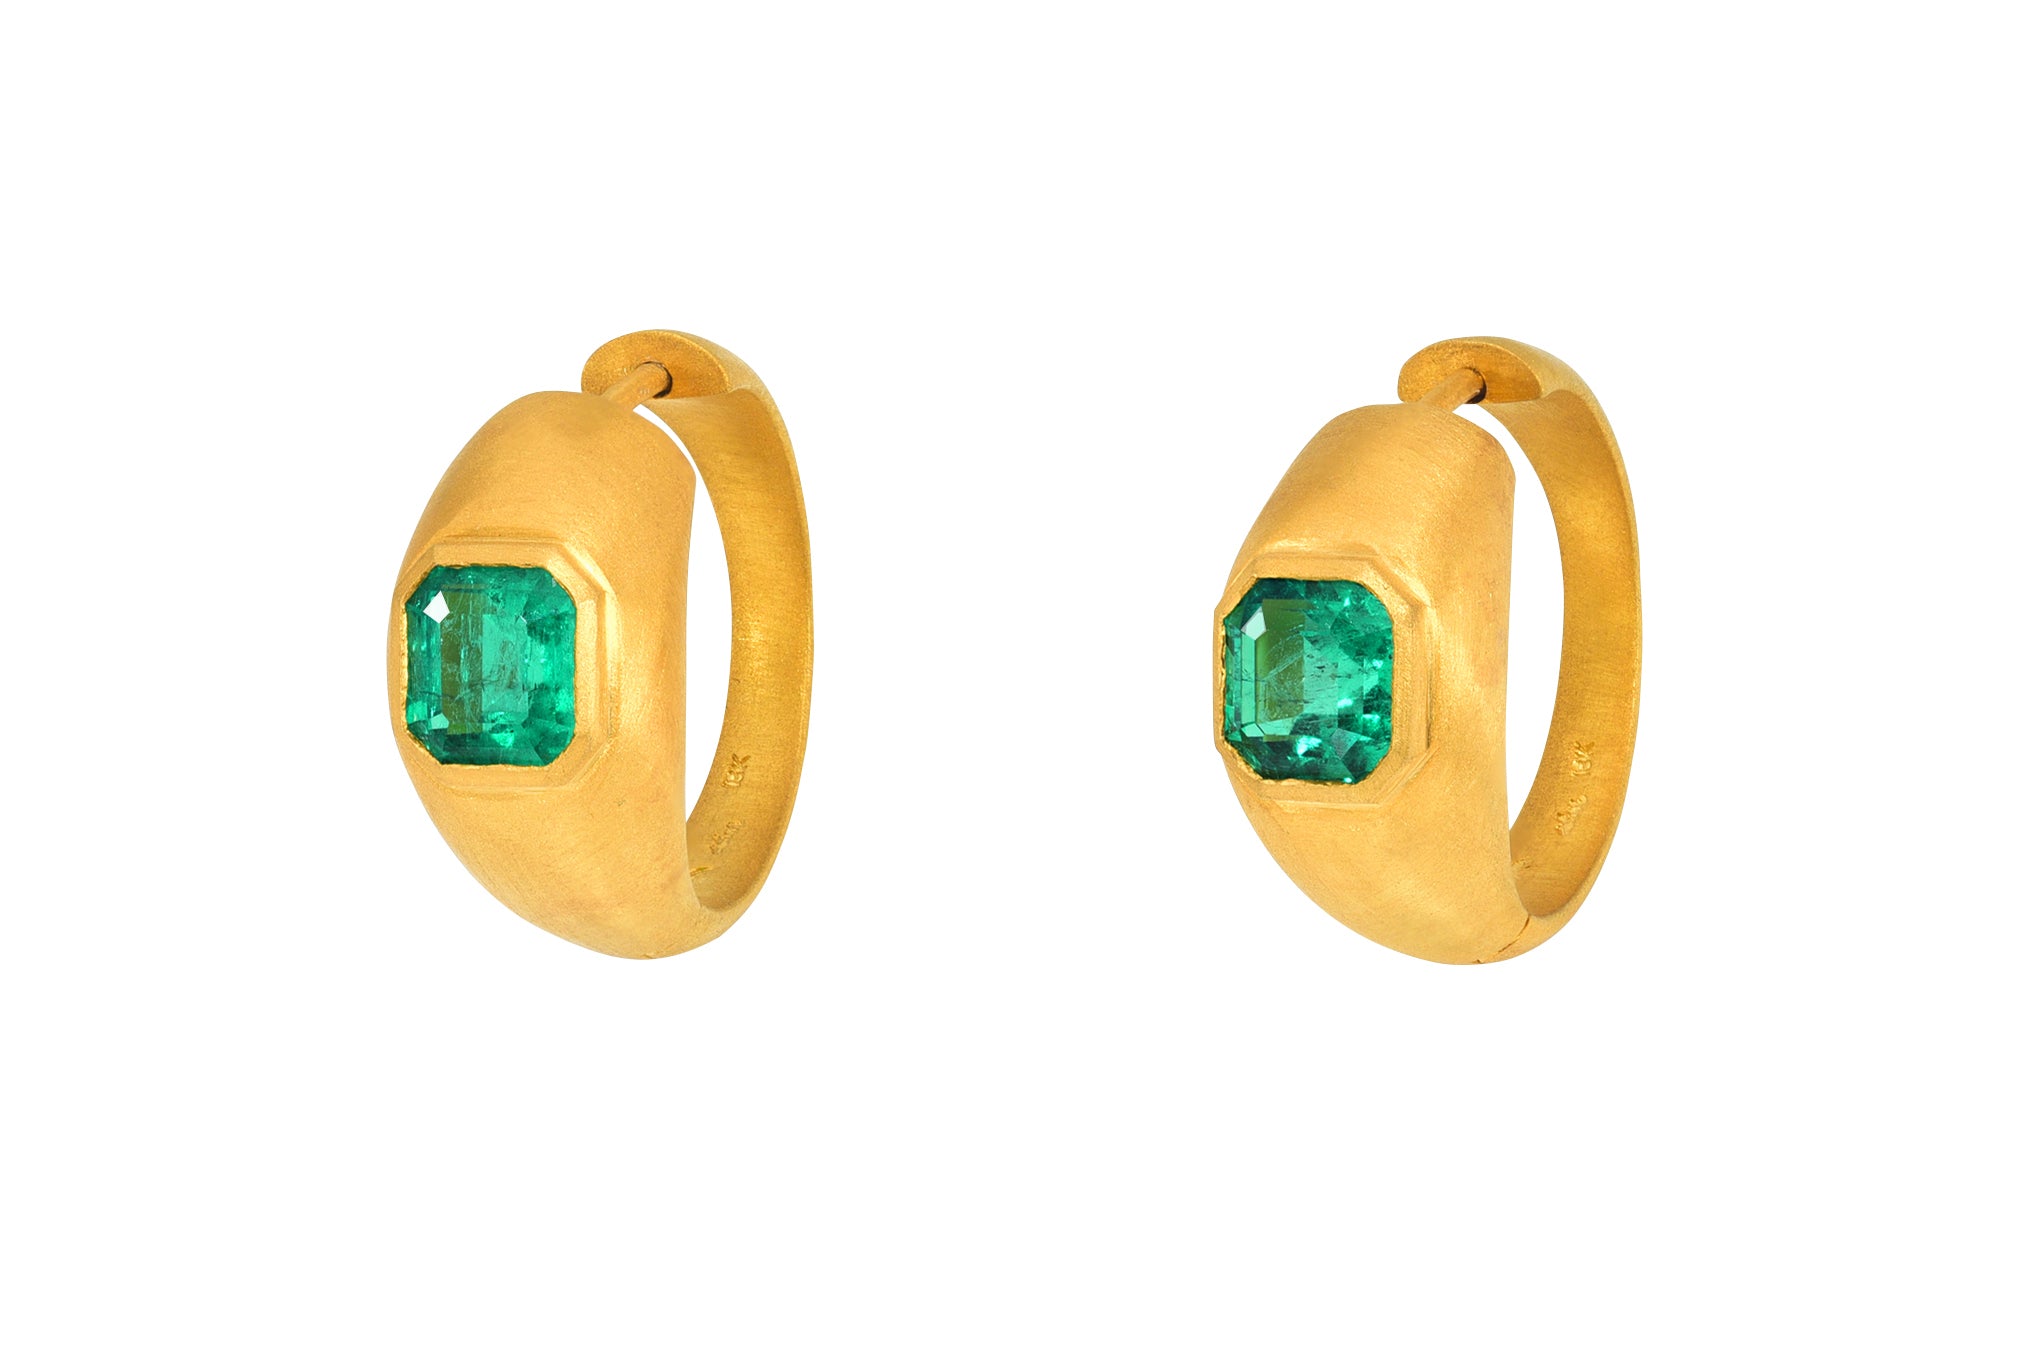 Darius Jewels one of a kind emerald ring hoops Colombian Fairmined yellow gold